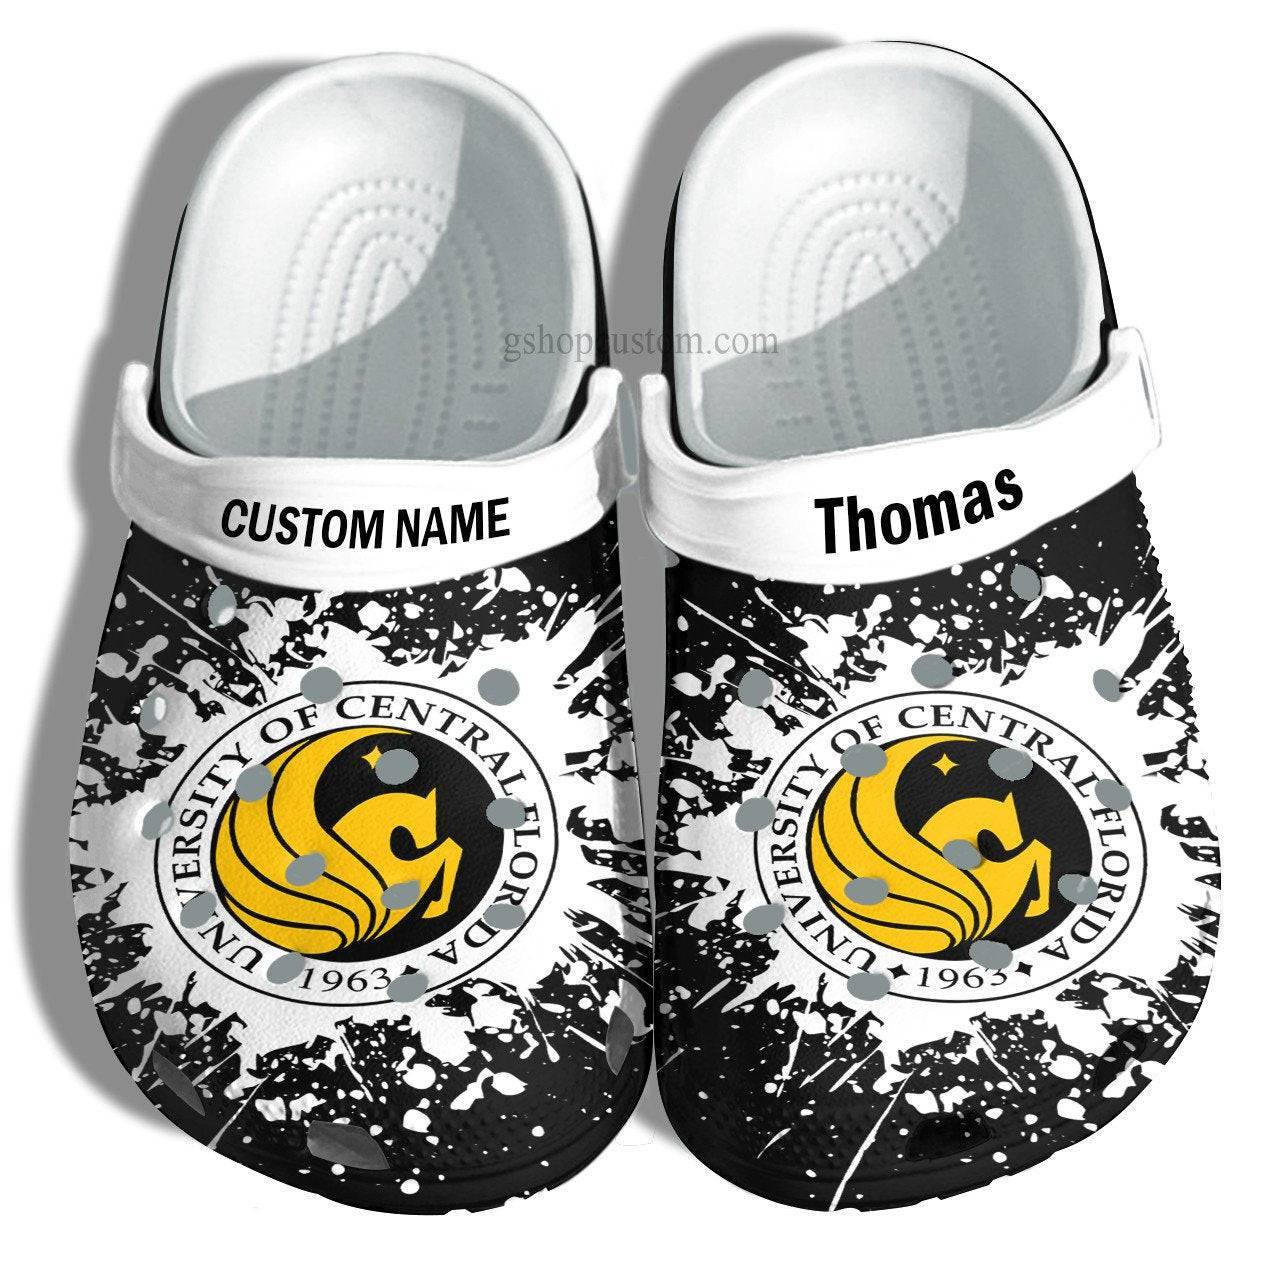 University Of Central Florida Graduation Gifts Croc Shoes Customize – Admission Gift Crocss Shoes